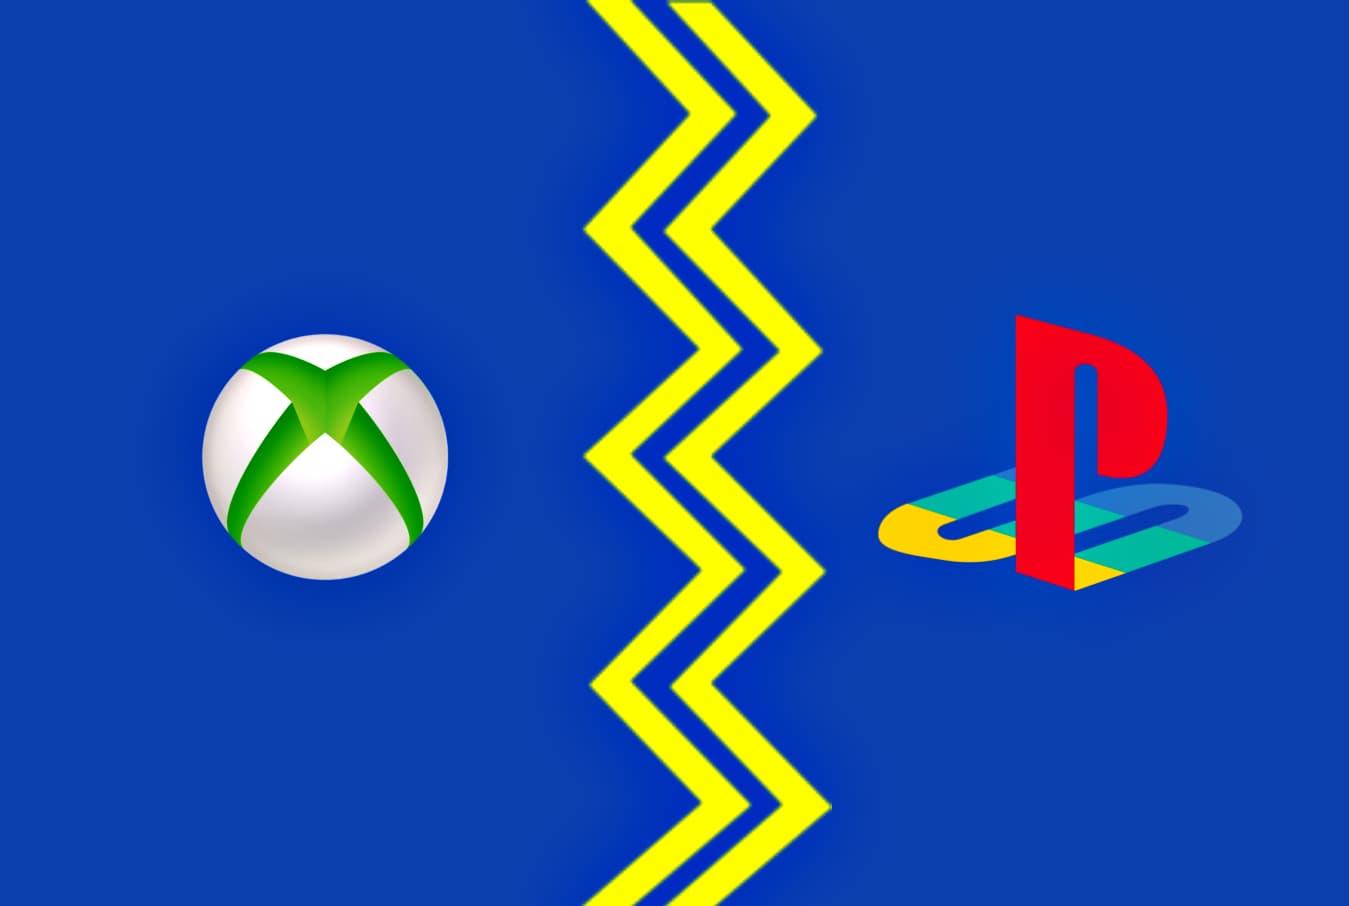 Xbox Two vs PlayStation 5: Which console is winning the race of anticipation?